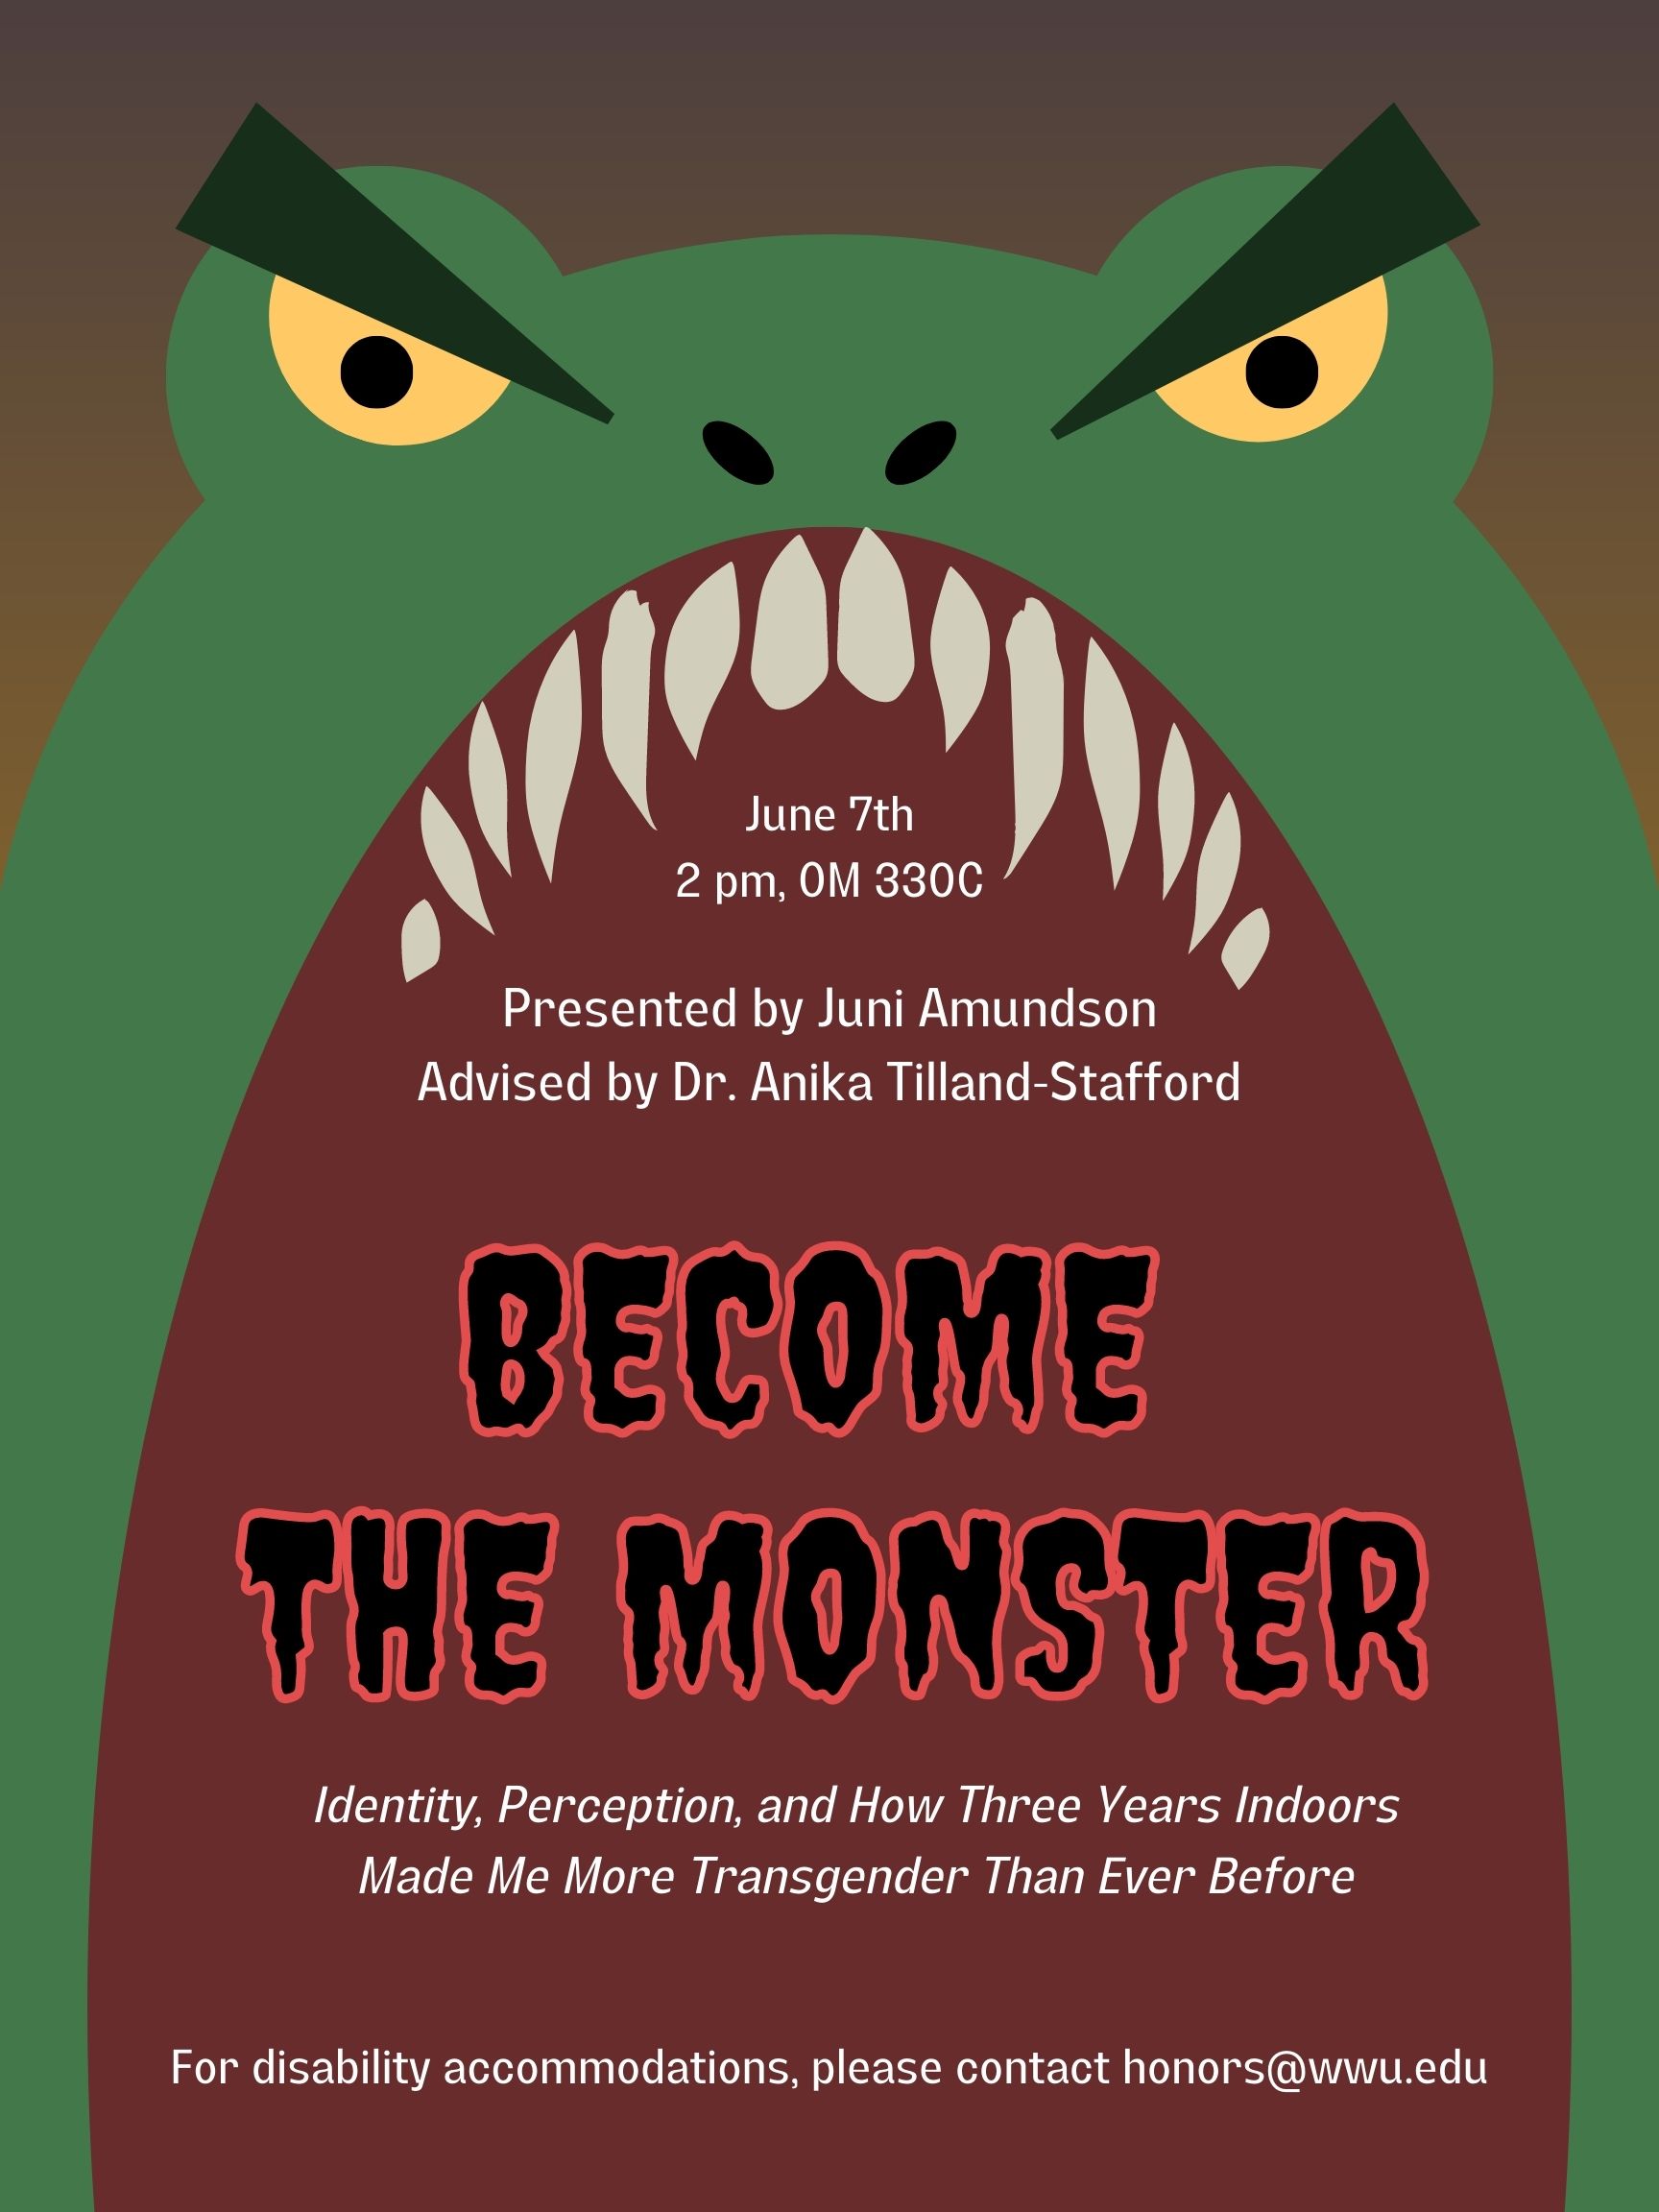 A cartoonish image of a large green monster with yellow eyes and an open mouth. In its mouth is white text reading "June 7th, 2pm, OM 330C. Presented by Juni Amundson, advised by Dr. Anika Tilland-Stafford." A large black and red title in a spooky font reads "Become the Monster" with a small white subtitle beneath it reading, "Identity, Perception, and How Three Years Indoors Made Me More Transgender Than Ever Before". At the bottom, white text reads "For disability accommodations, please contact honors@wwu